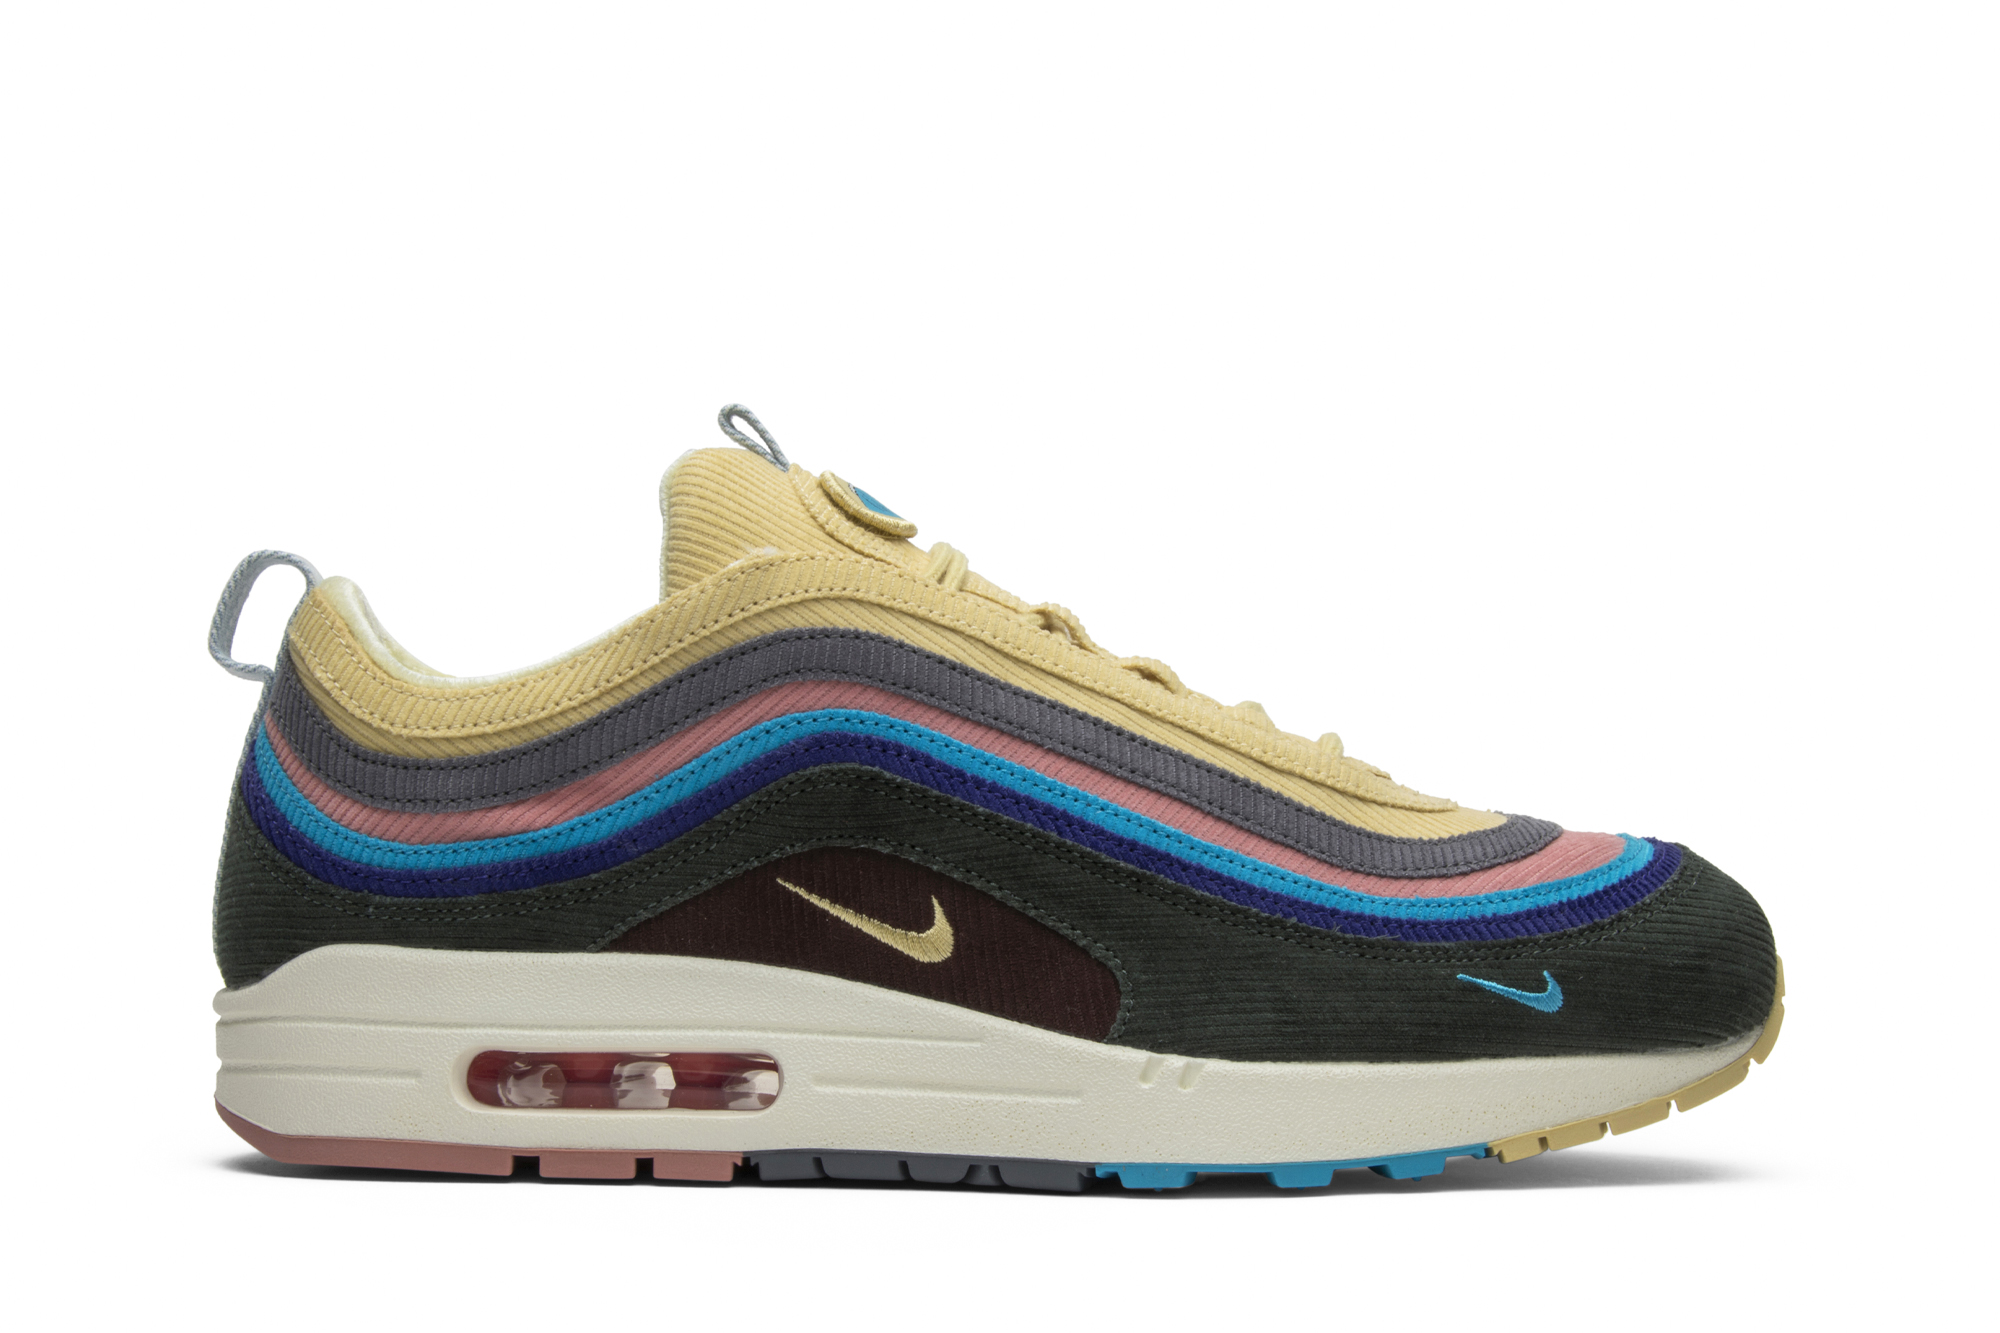 Sean Wotherspoon A1r Max 1